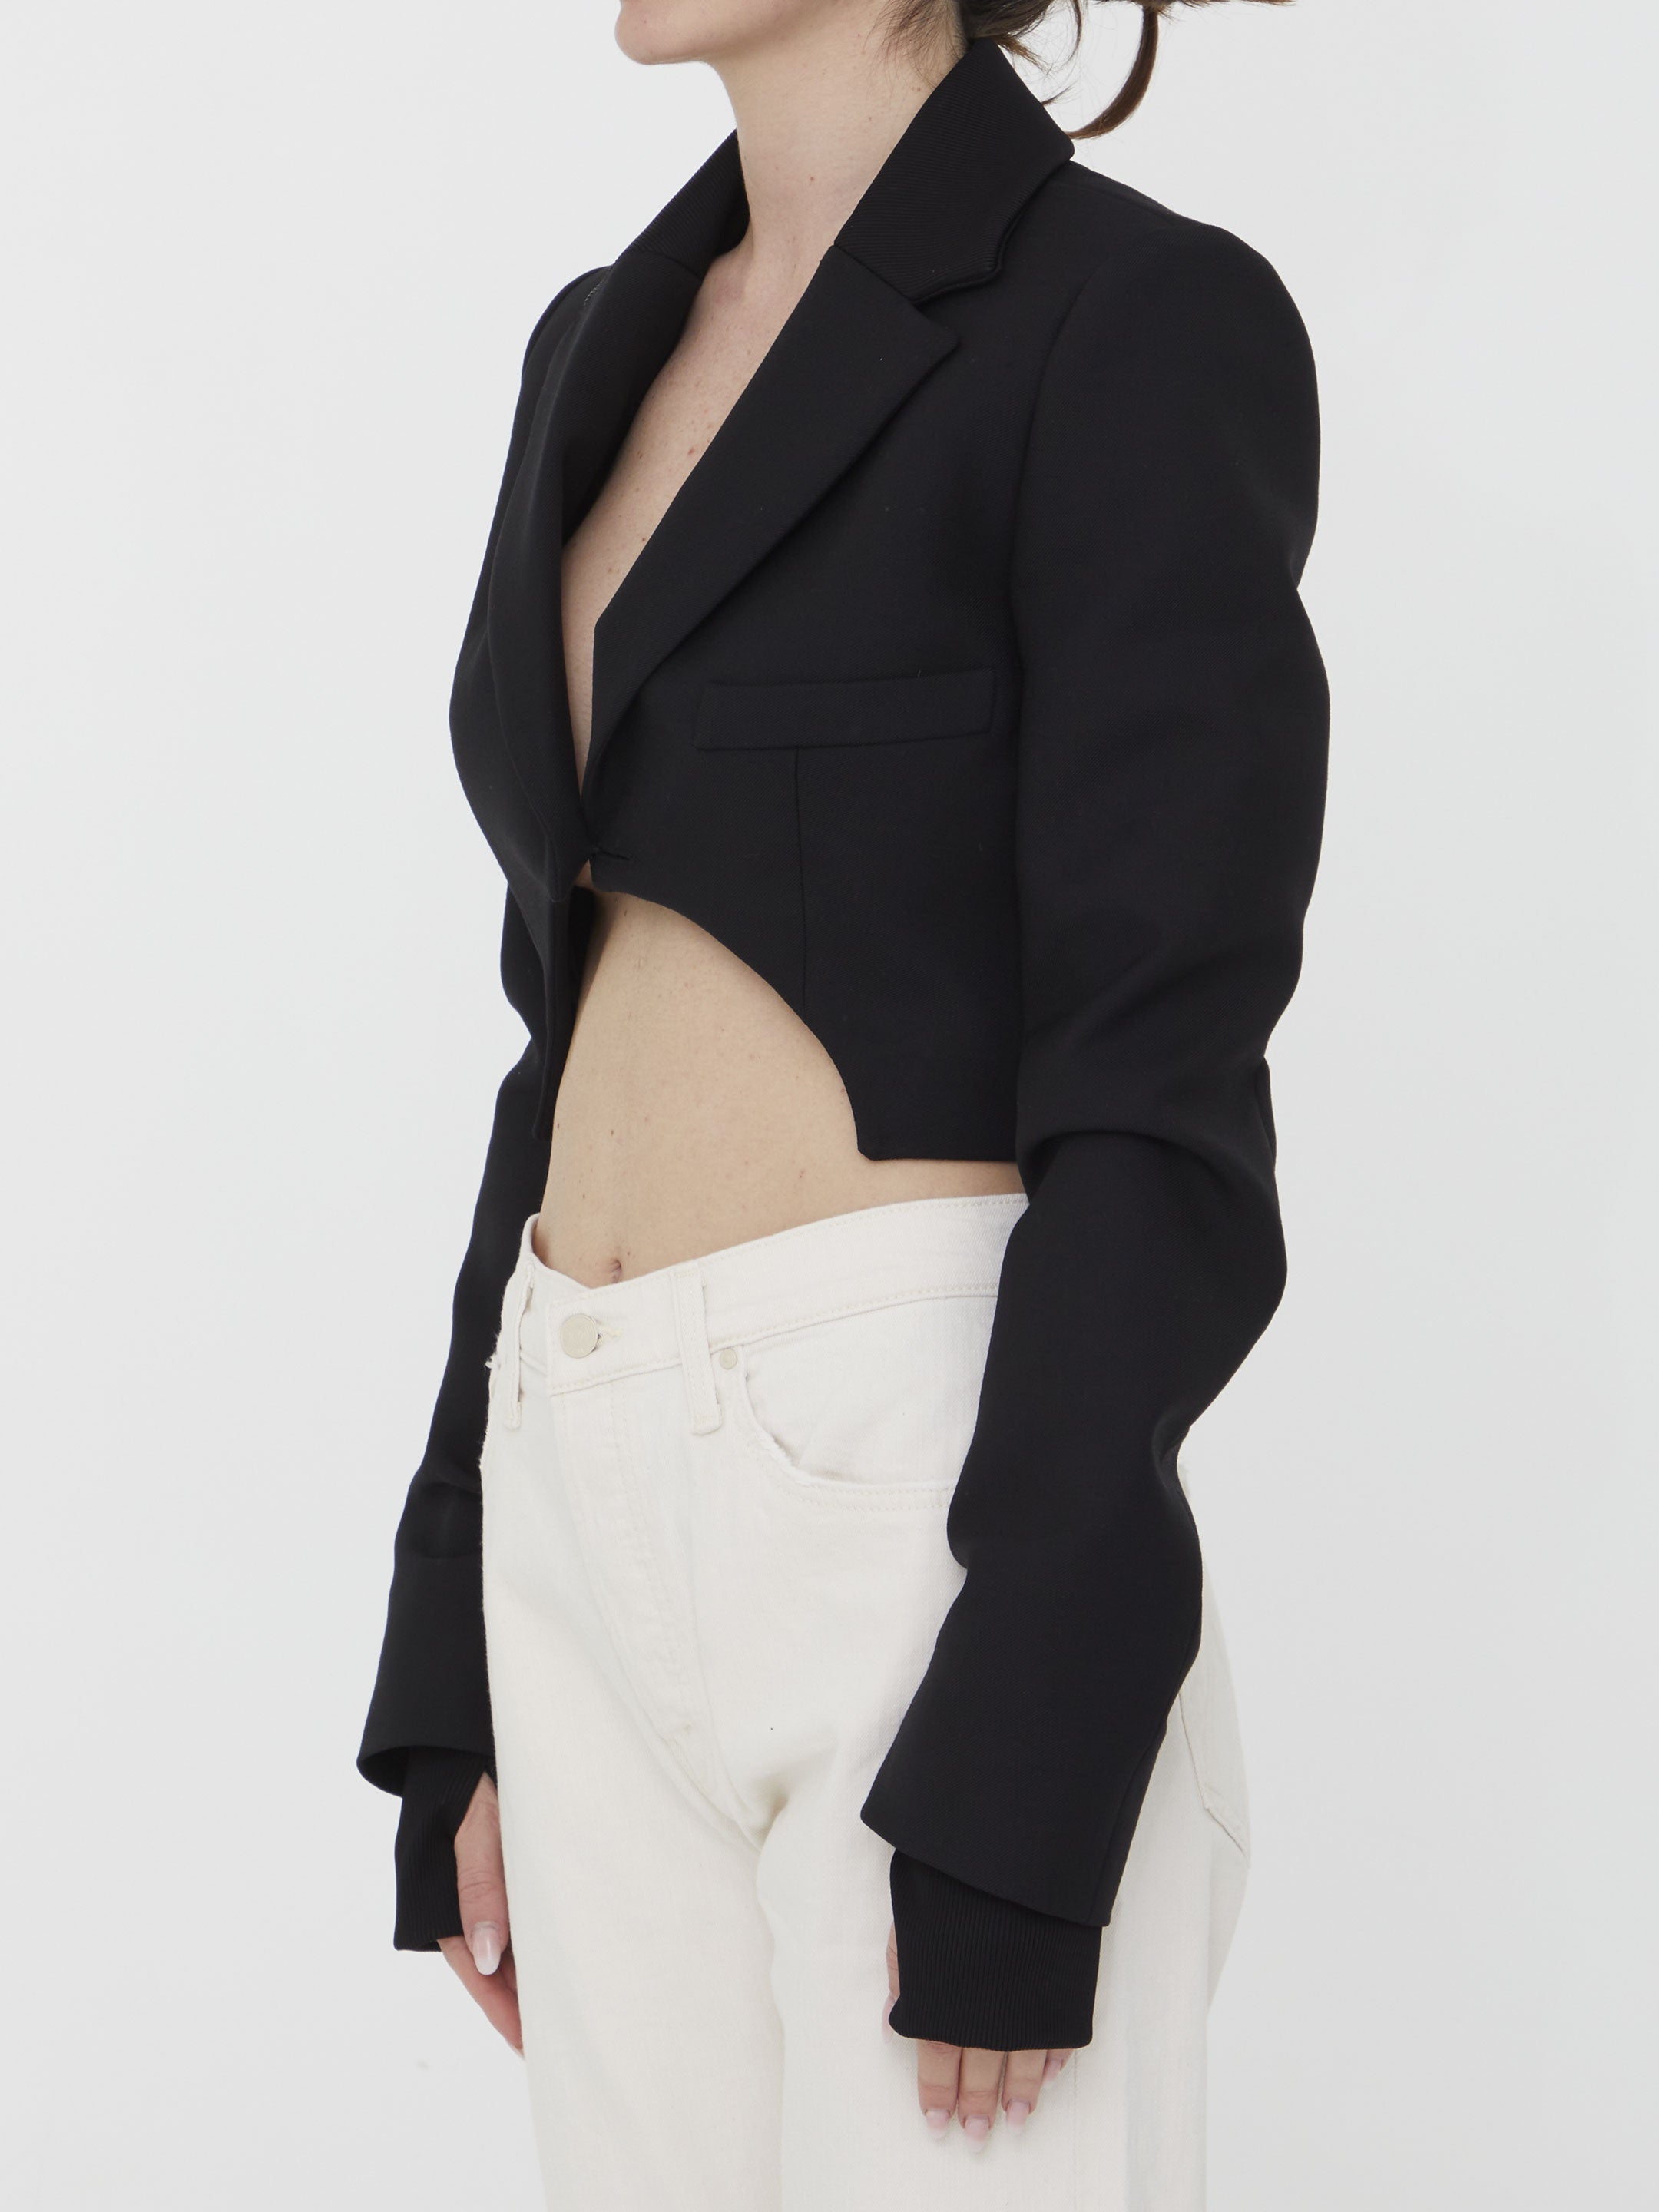 OFF-WHITE-OUTLET-SALE-Asymmetrical-cropped-jacket-Jacken-Mantel-ARCHIVE-COLLECTION-2.jpg